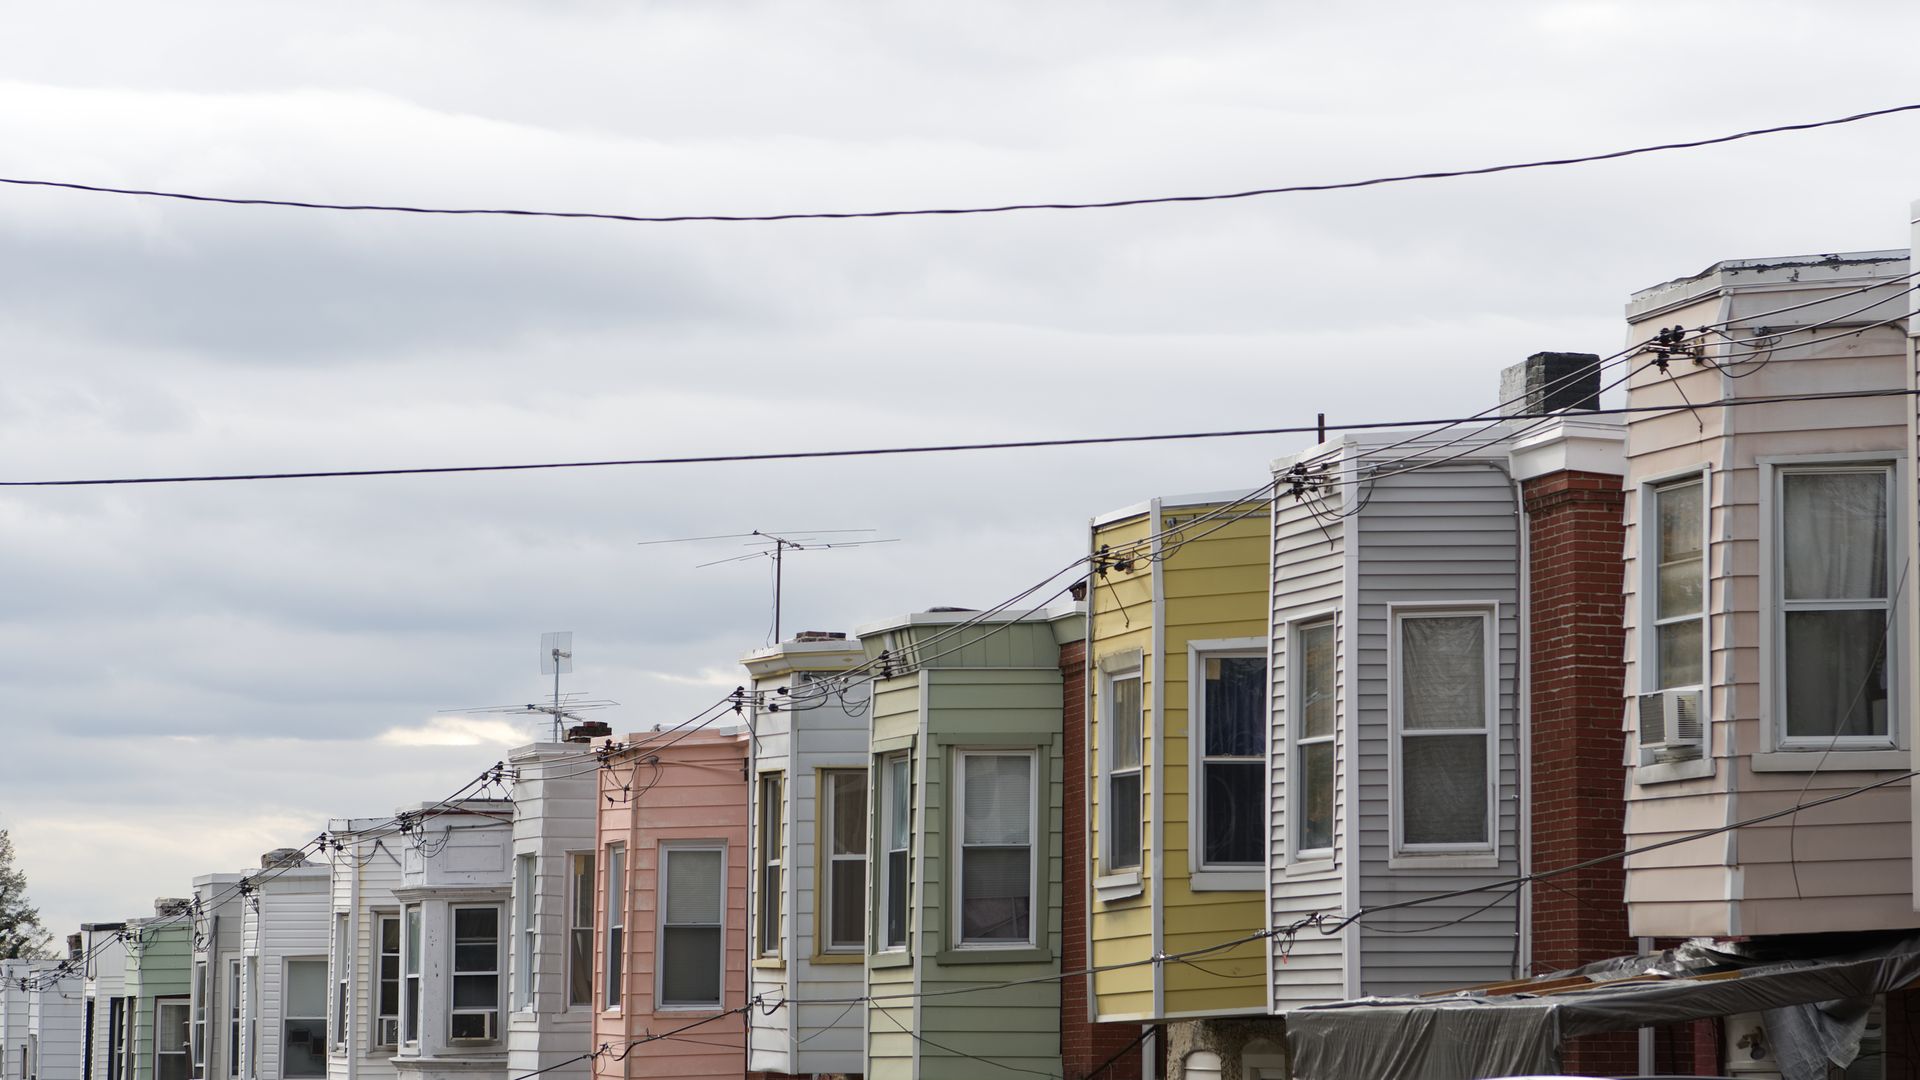 Row home facades on a residential street in Germantown section of Philadelphia, PA. Photo: Bastiaan Slabbers/Getty